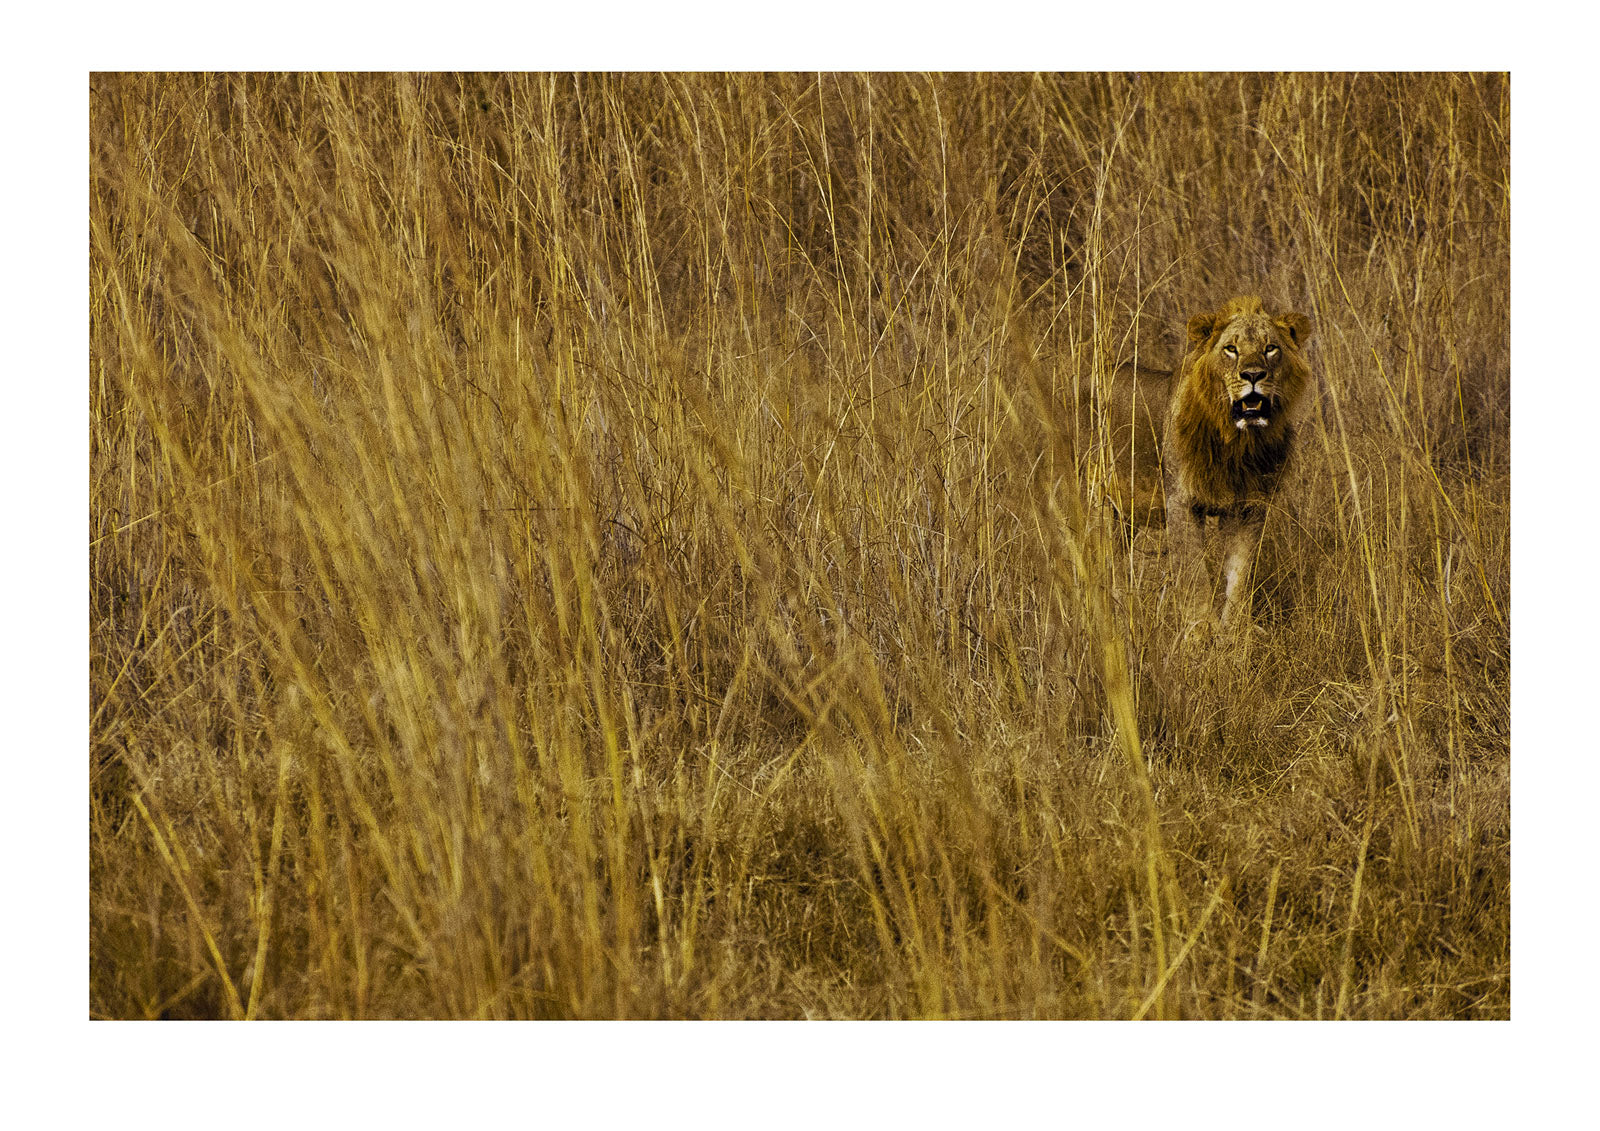 Male lion lets his presence be known while patrolling his territory. Nairobi National Park, Kenya.